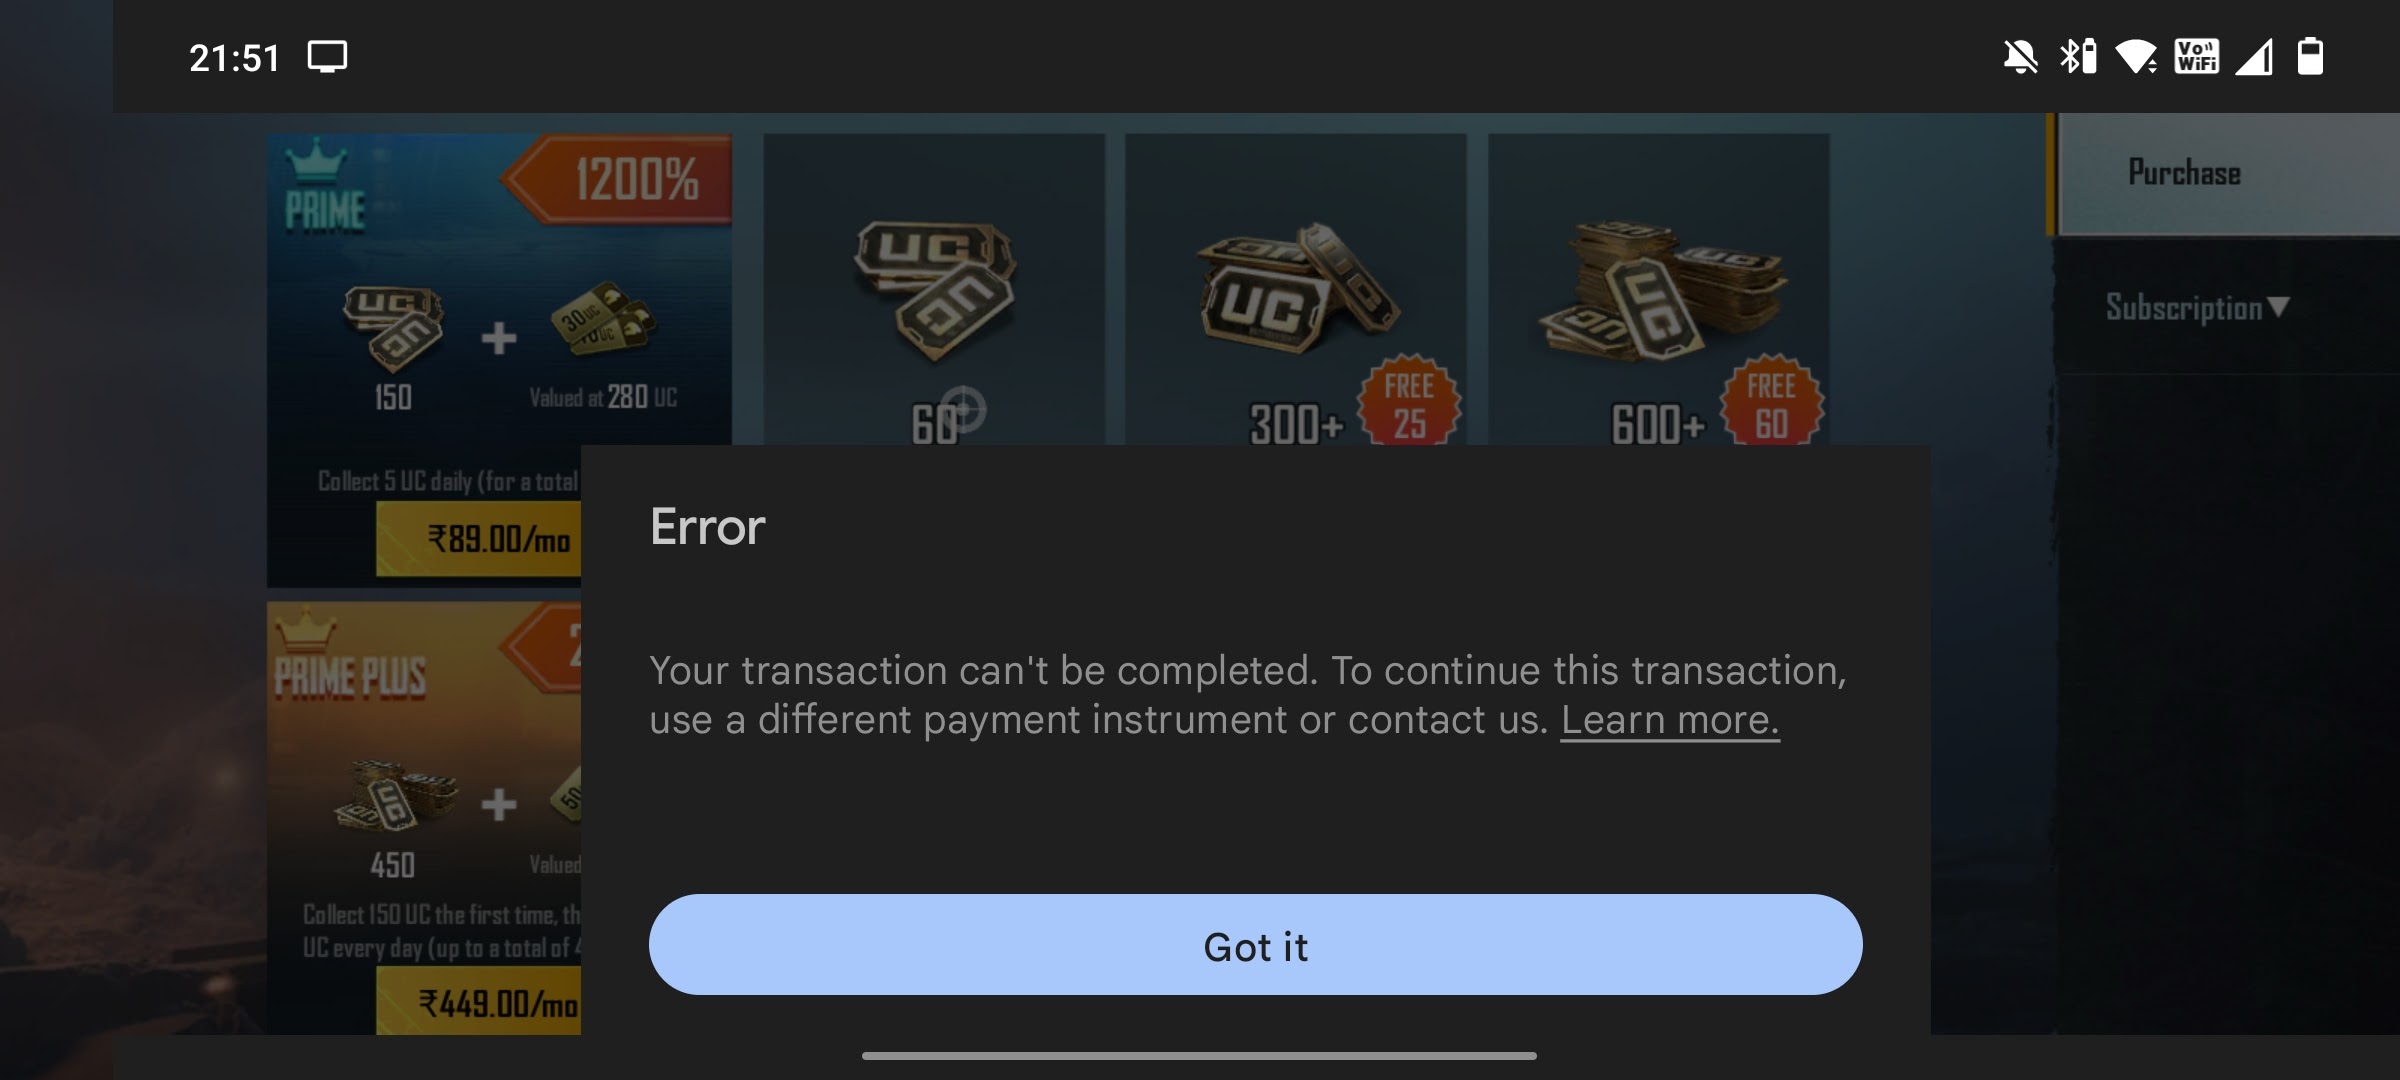 Free fire top up err transaction cannot completed - Google Play Community